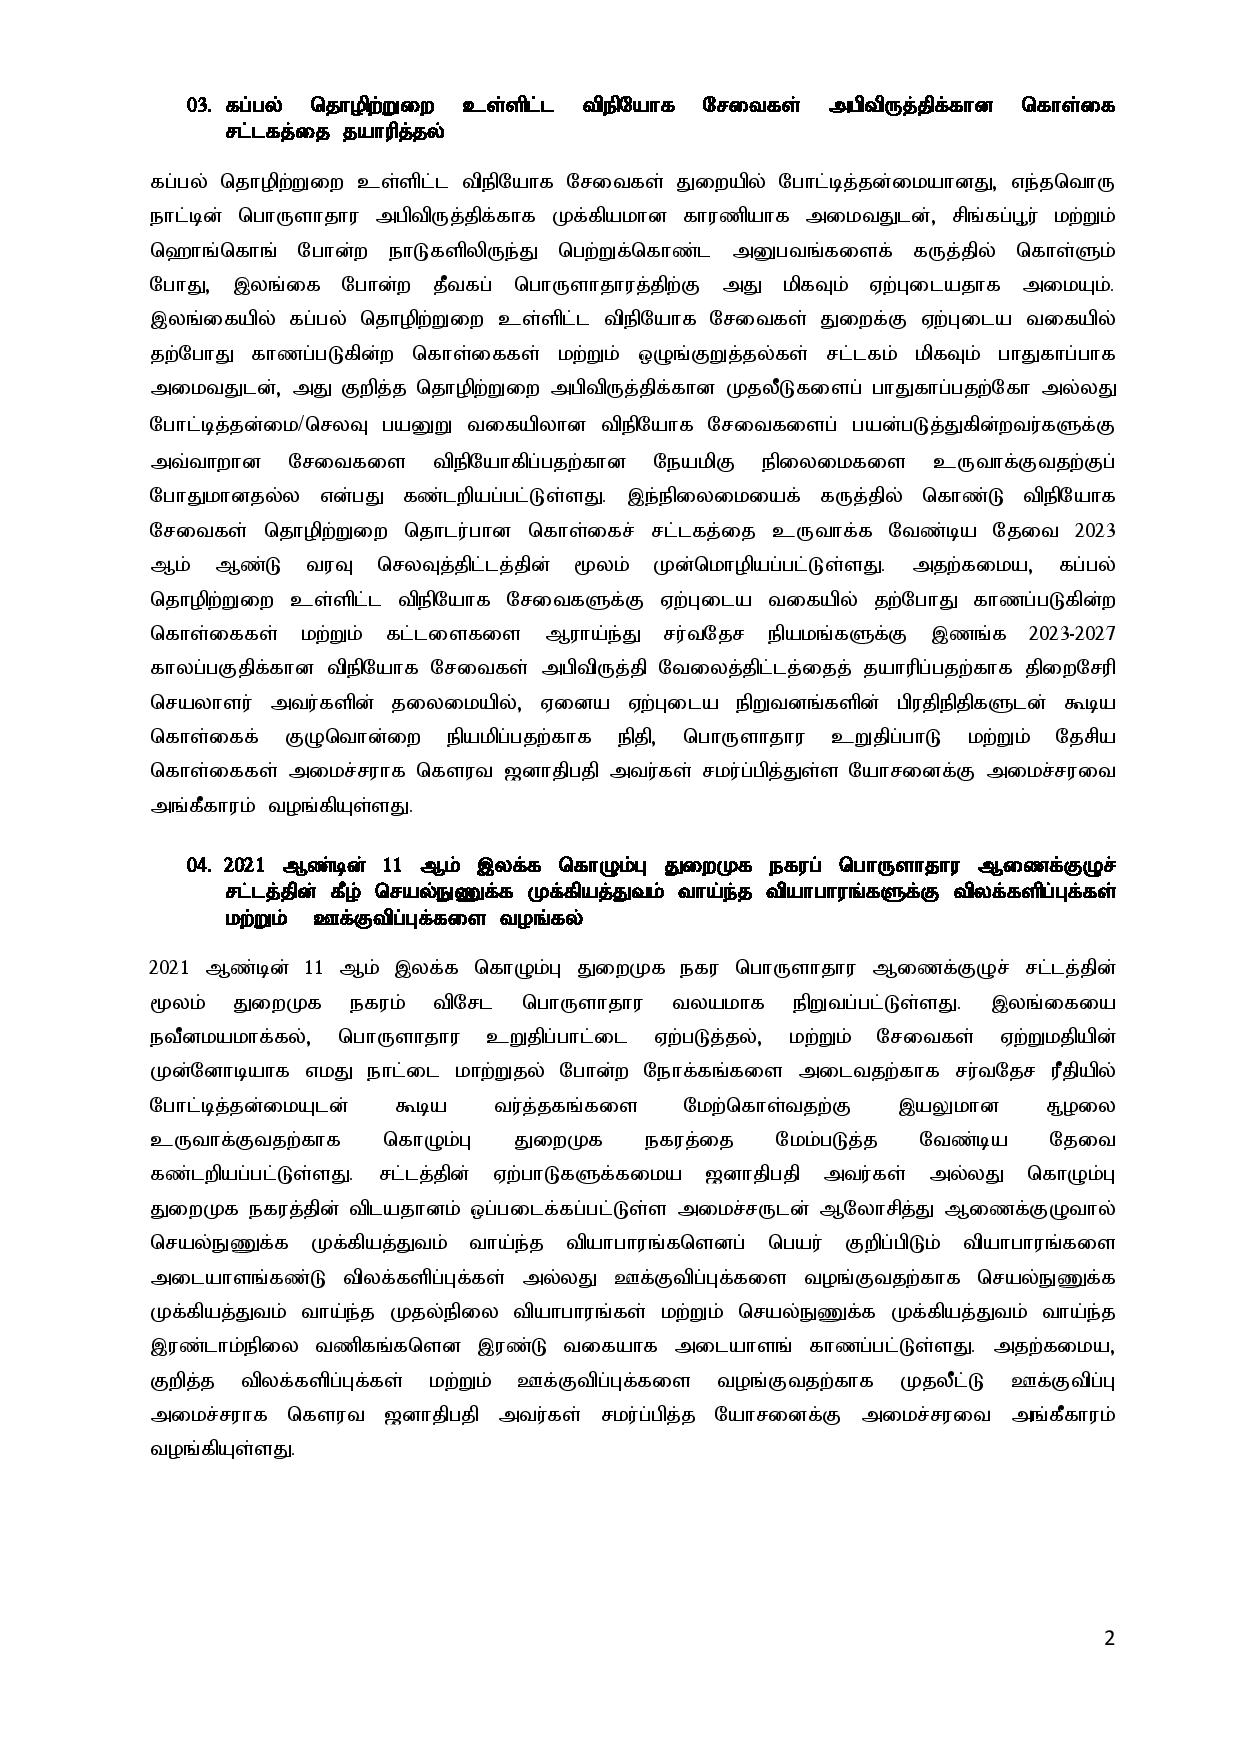 Cabinet Decisions on 22.05.2023 Tamil 1 page 002